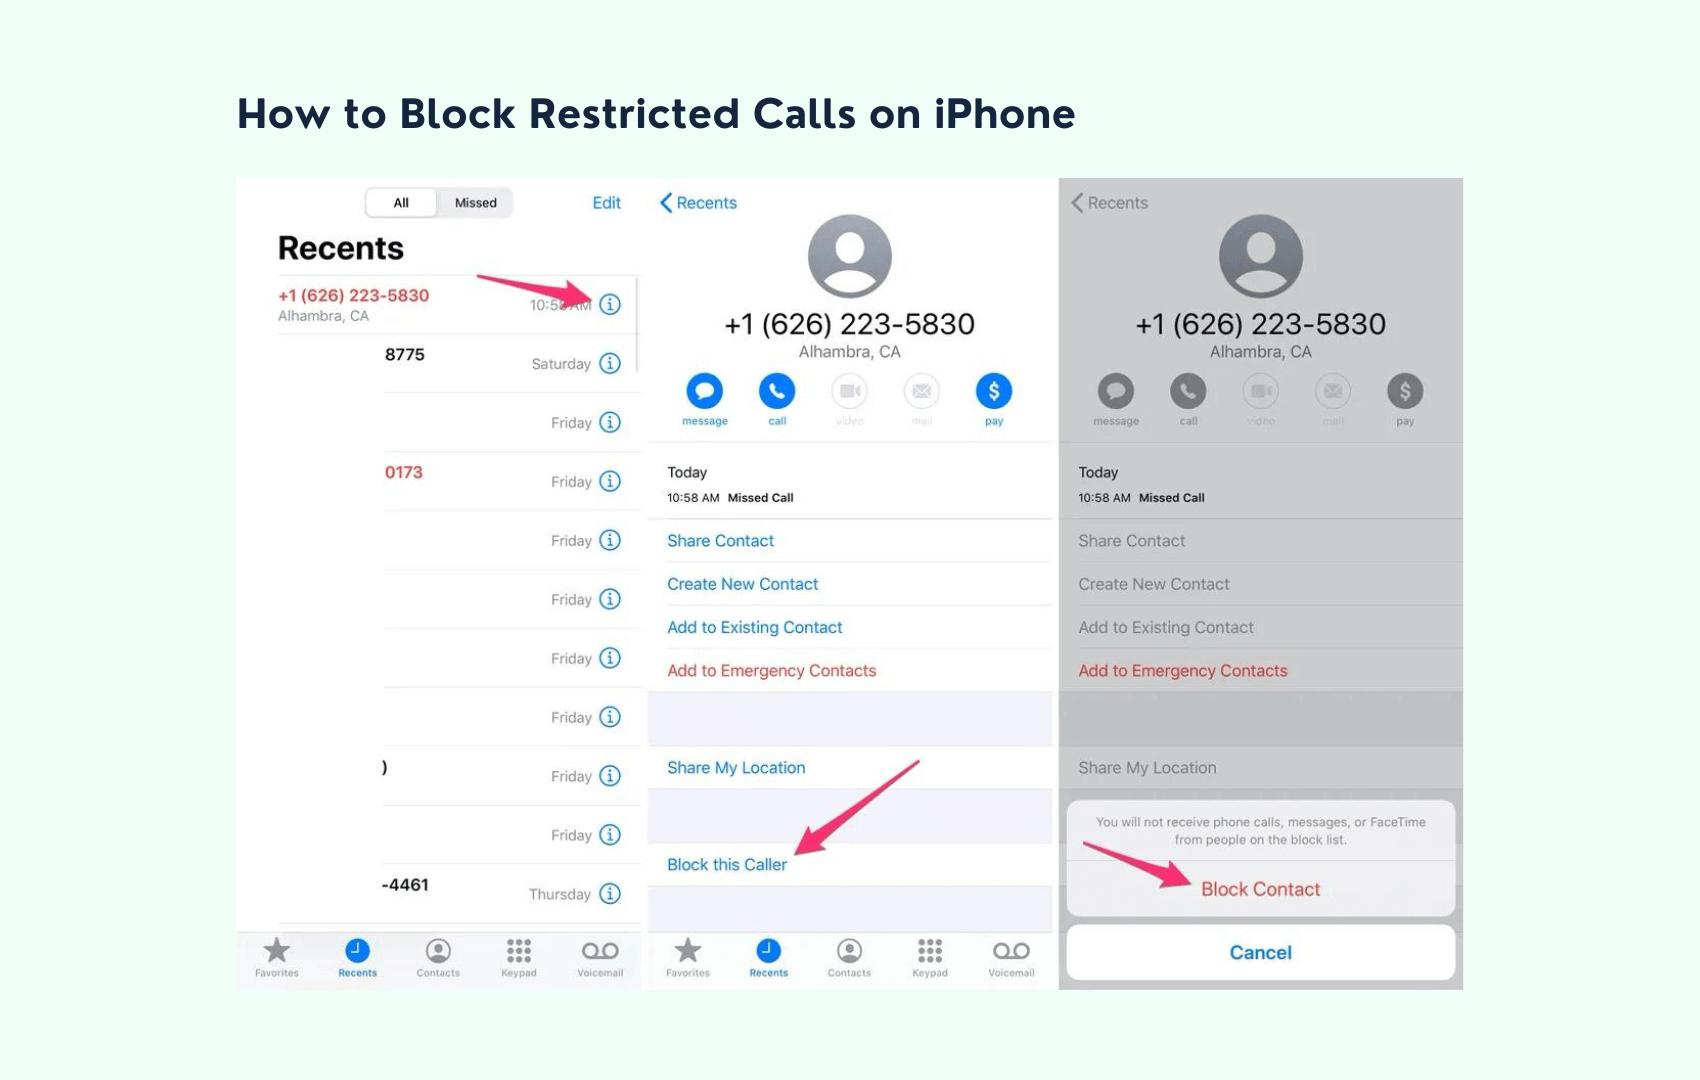 How to Block Restricted Calls on iPhone